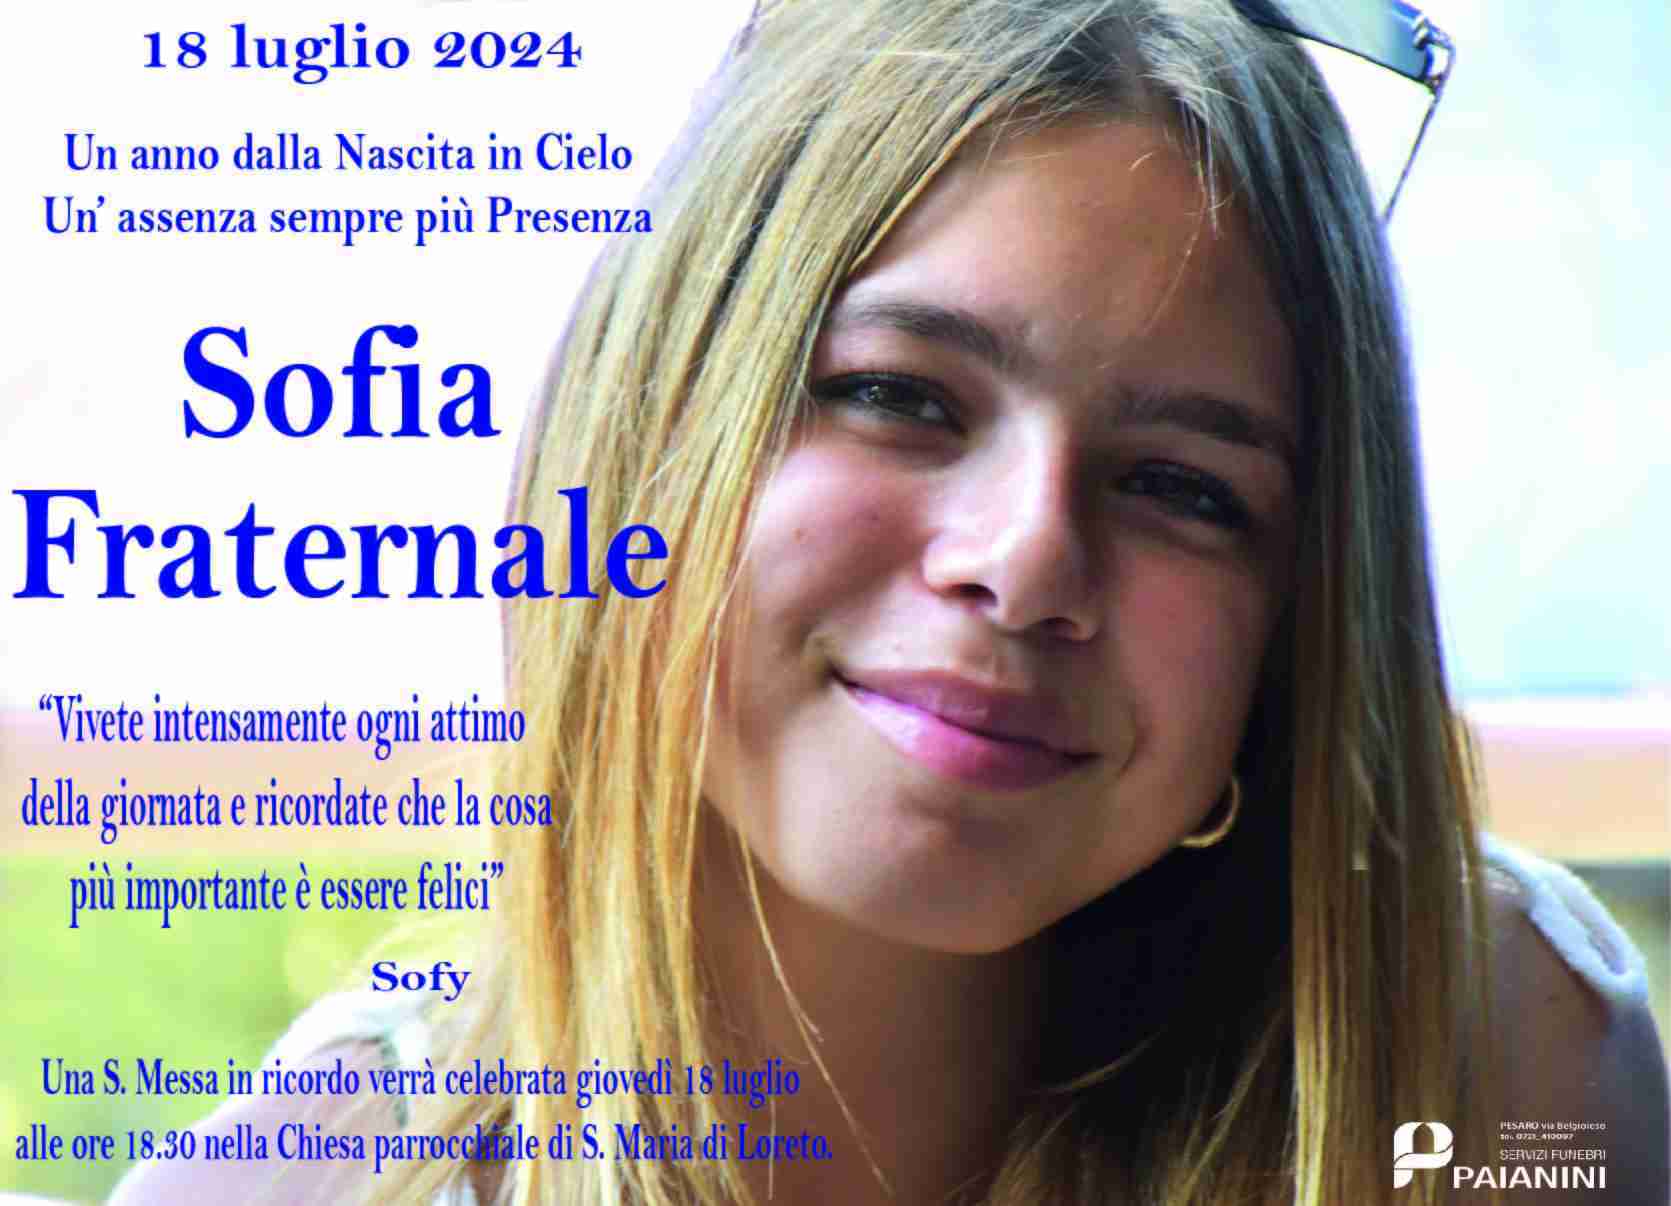 Sofia Fraternale